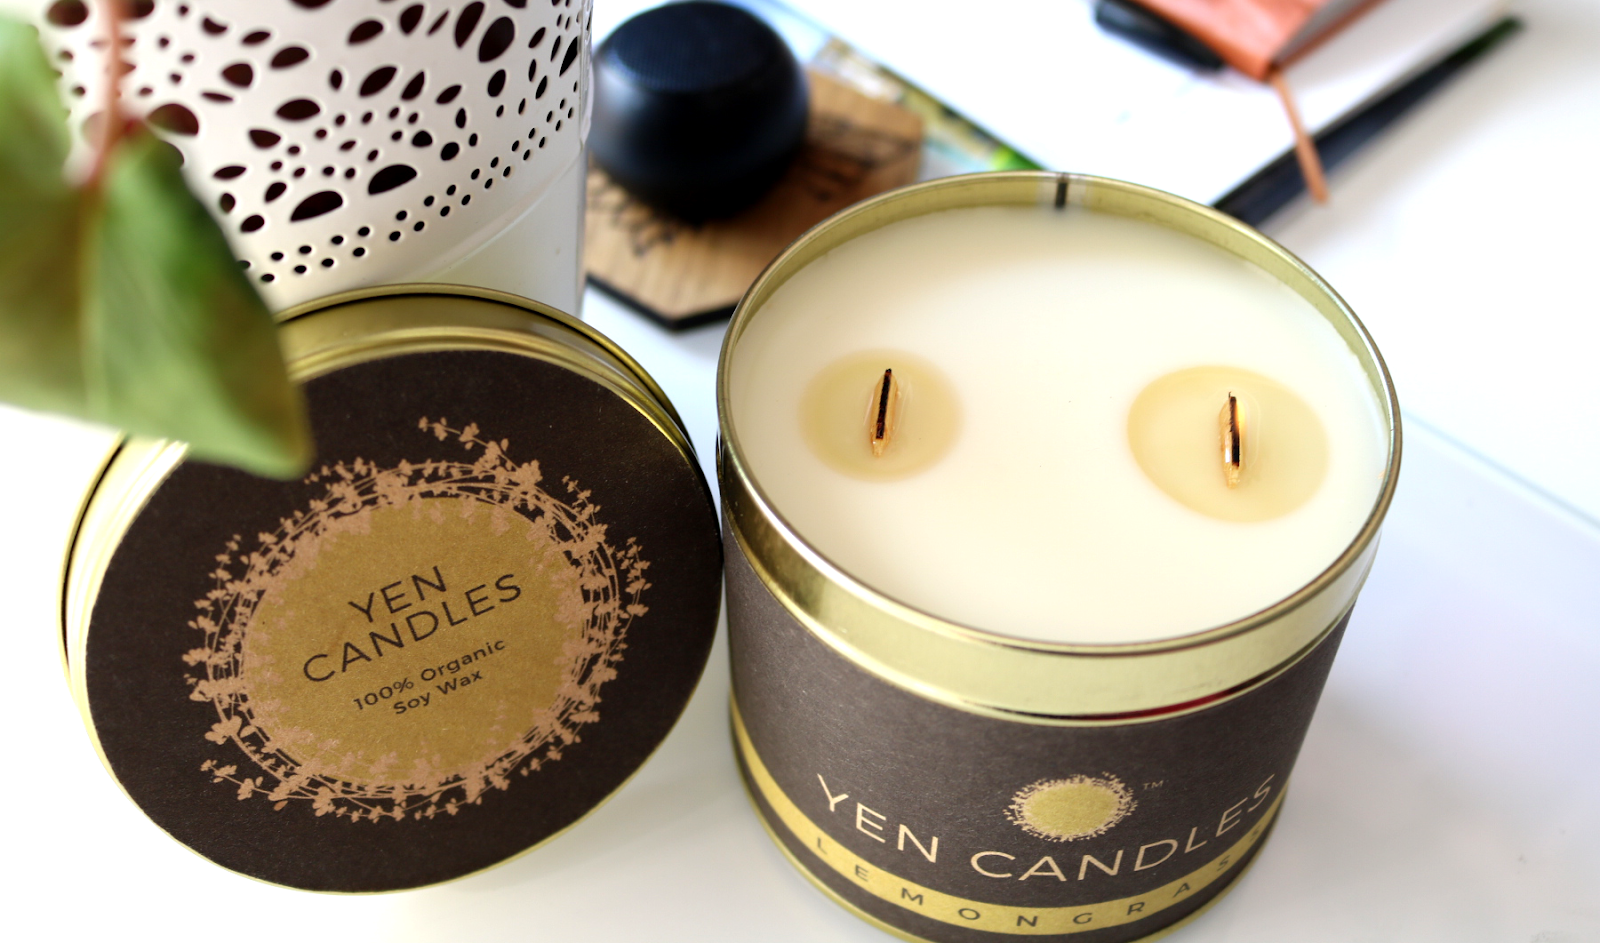 Yen Candles - 100% Organic Soy Wax Candle in Lemongrass review